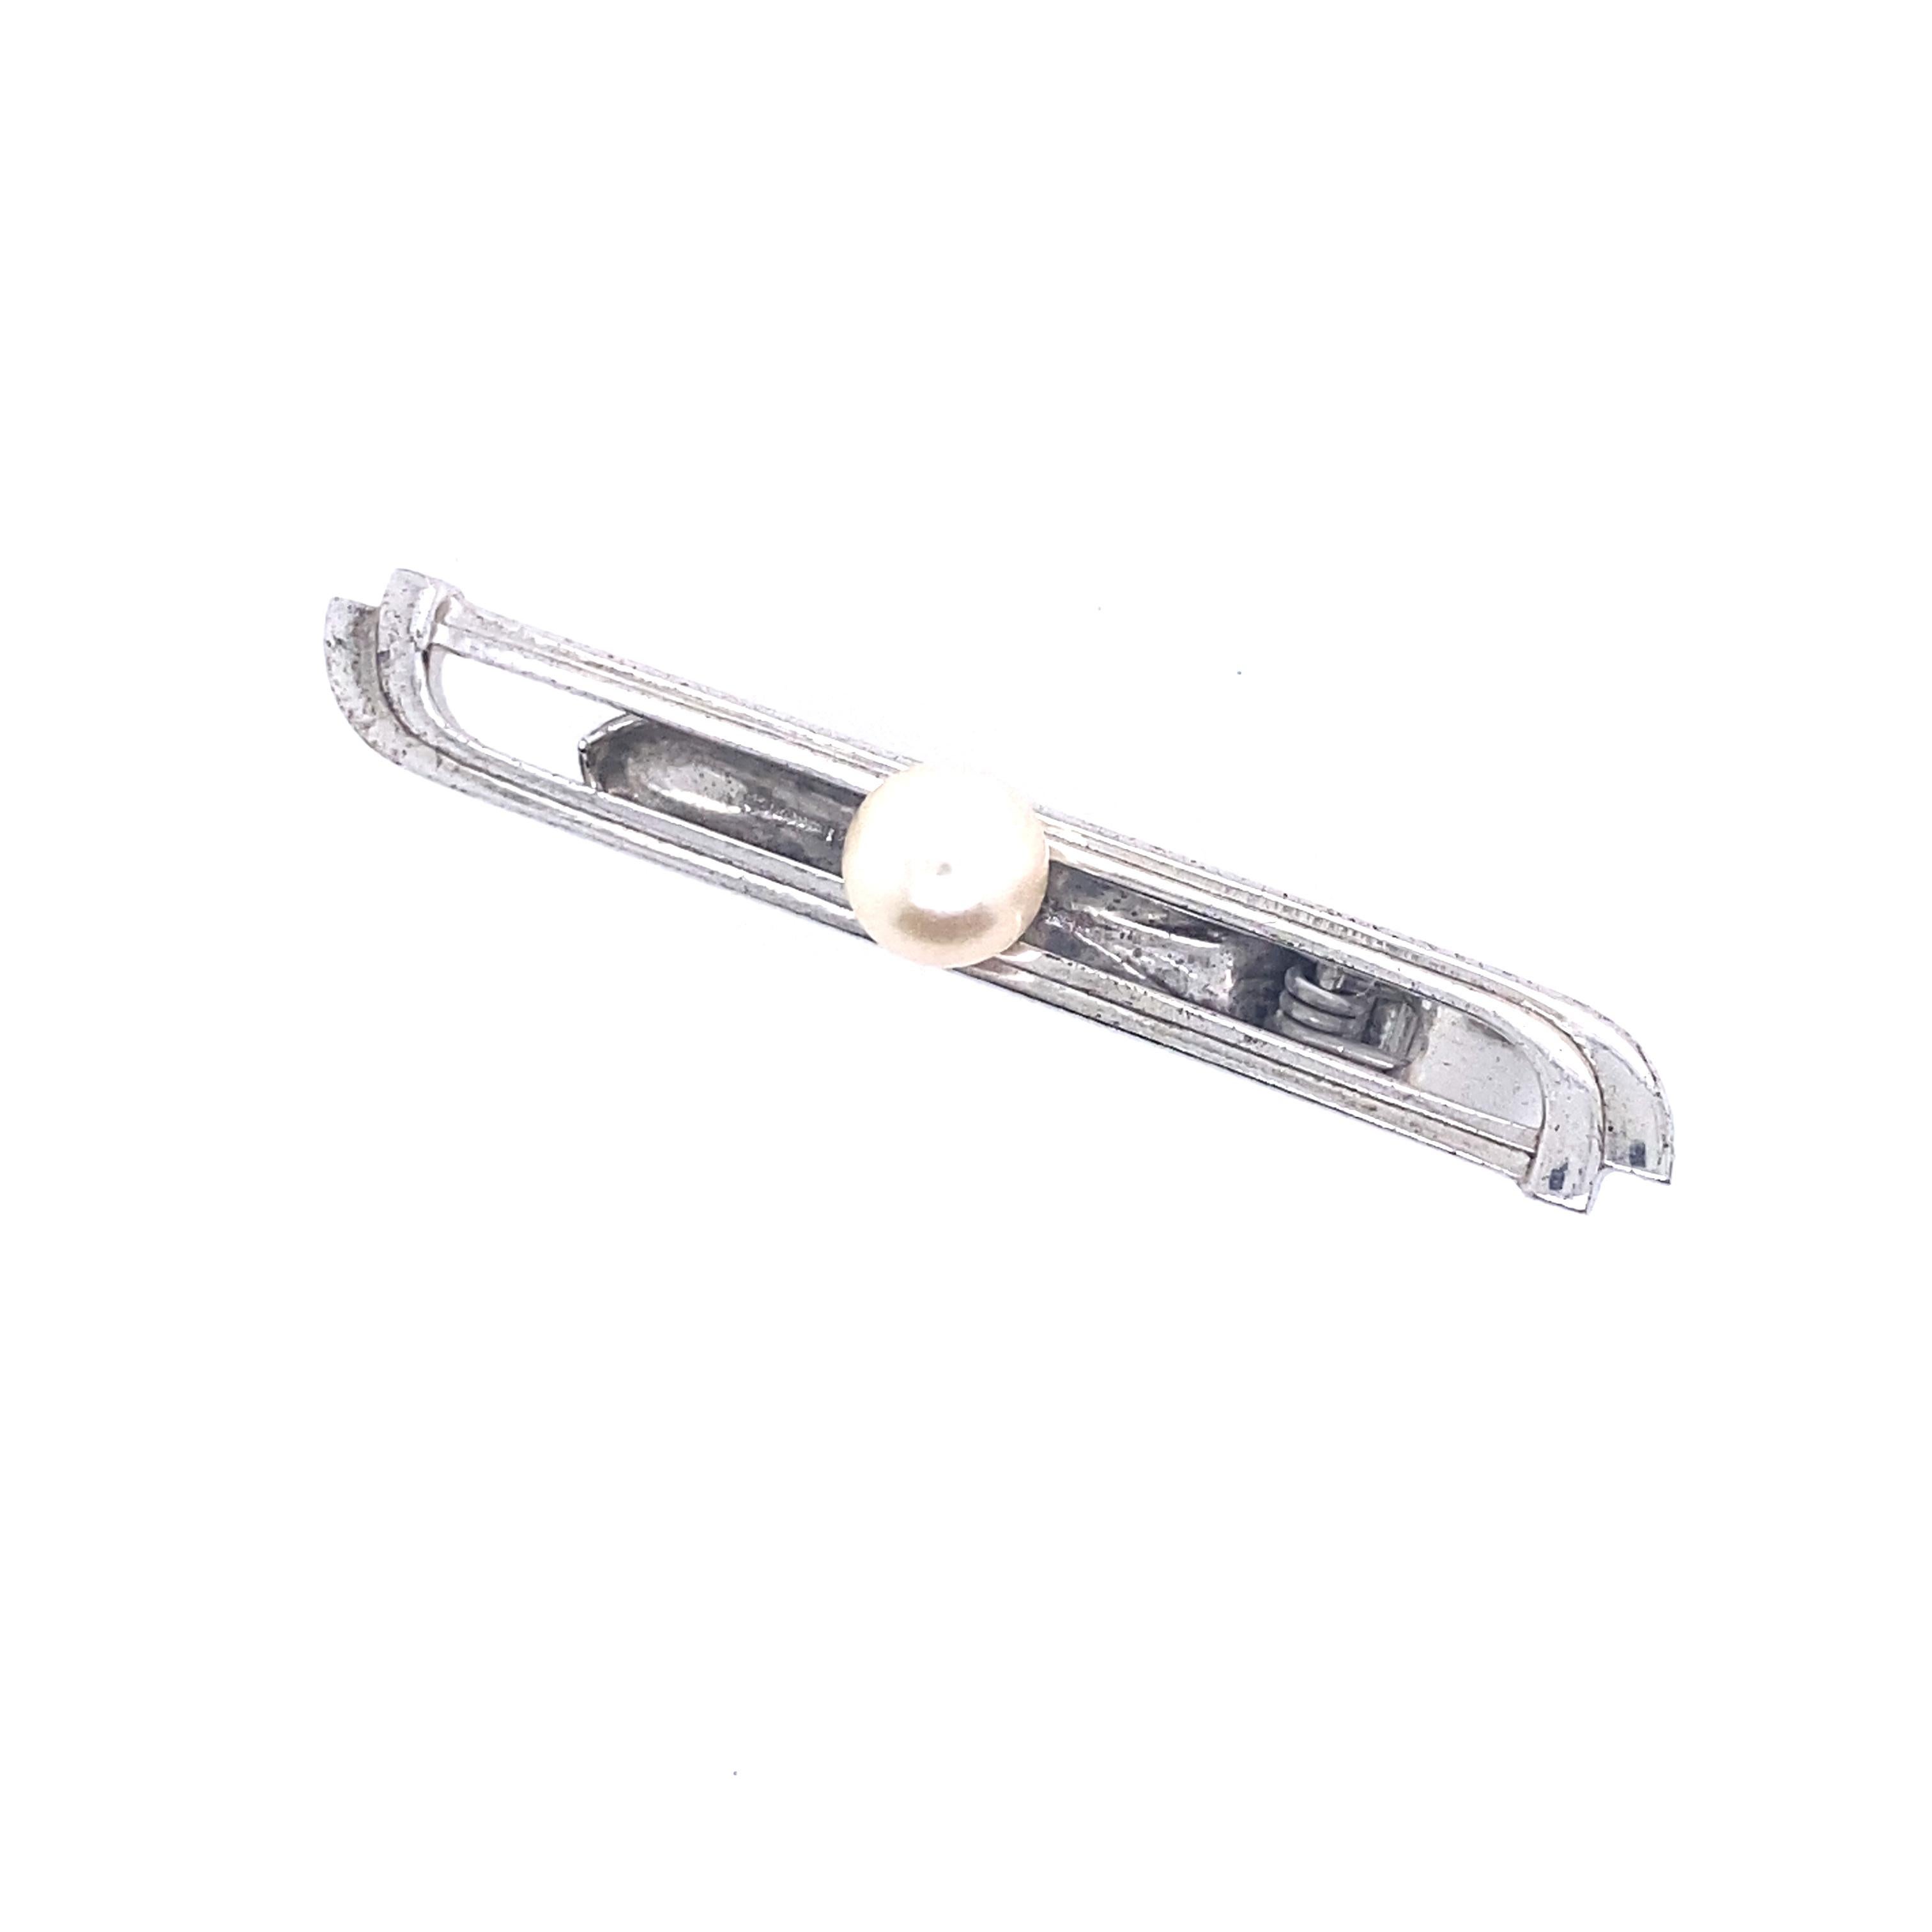 Mikimoto Estate Akoya Pearl Tie Bar Sterling Silver 6.73 mm 5.91 Grams M172

This elegant Authentic Mikimoto Estate Akoya pearl tie bar is made of sterling silver and has 1 Akoya Cultured Pearl in size of 6.73 mm with a weight of 5.91